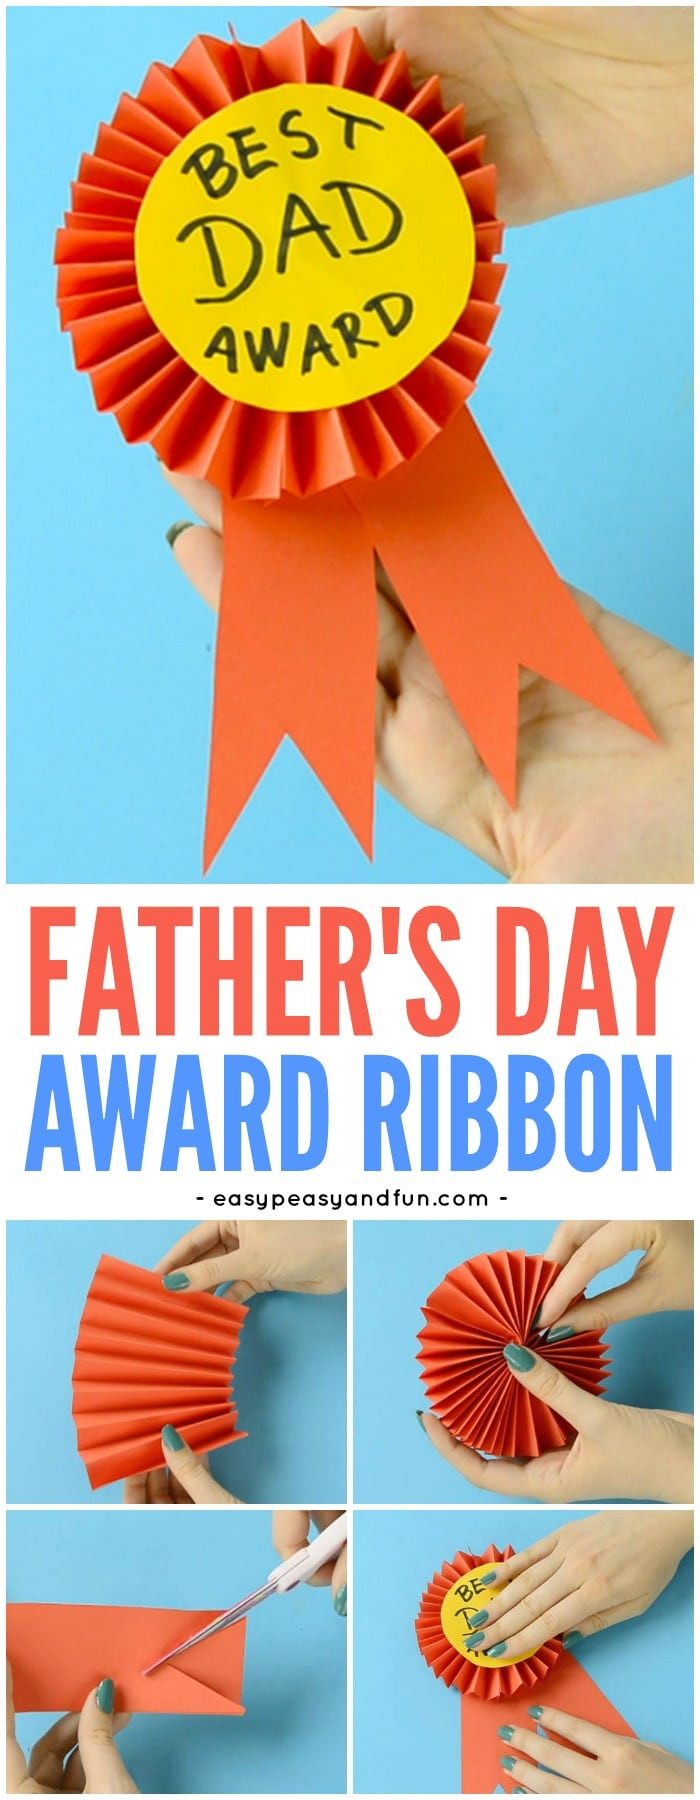 Fathers Day Craft For Kids
 DIY Paper Award Ribbon Father s Day Craft Idea Easy